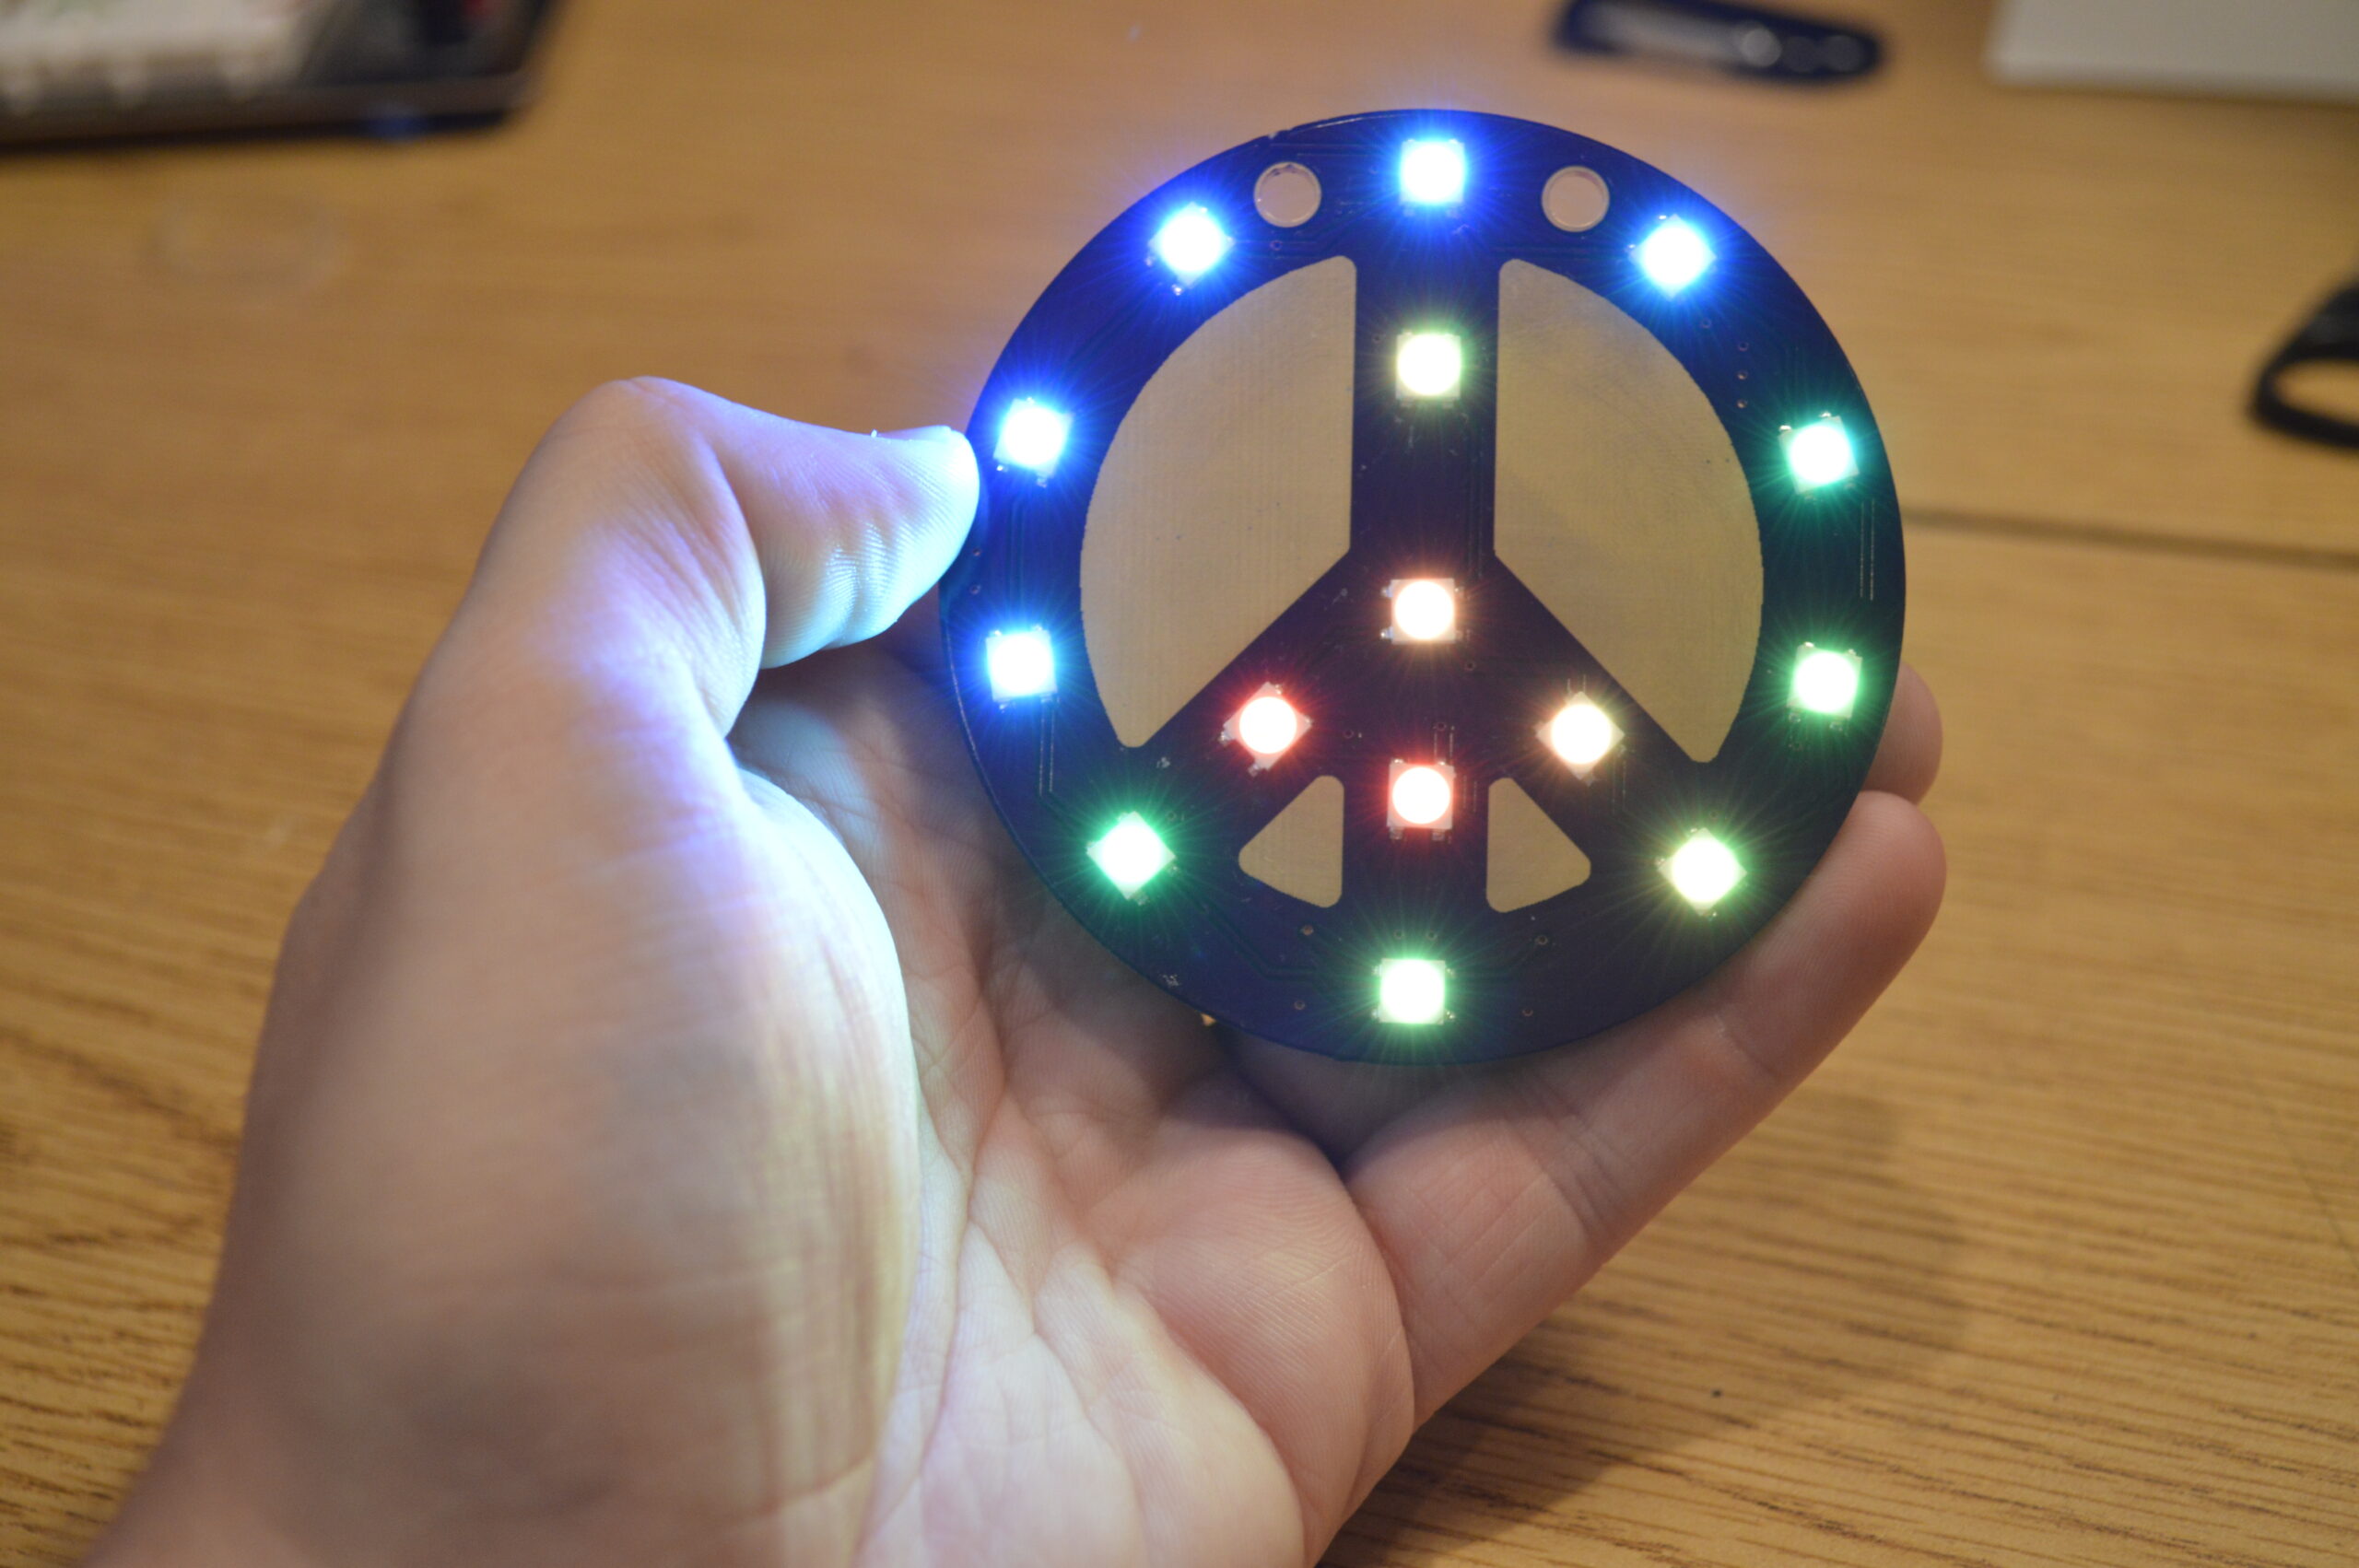 Image showing a portable, battery-powered RGB LED branding tool called a Glogo, or Hype Lights.